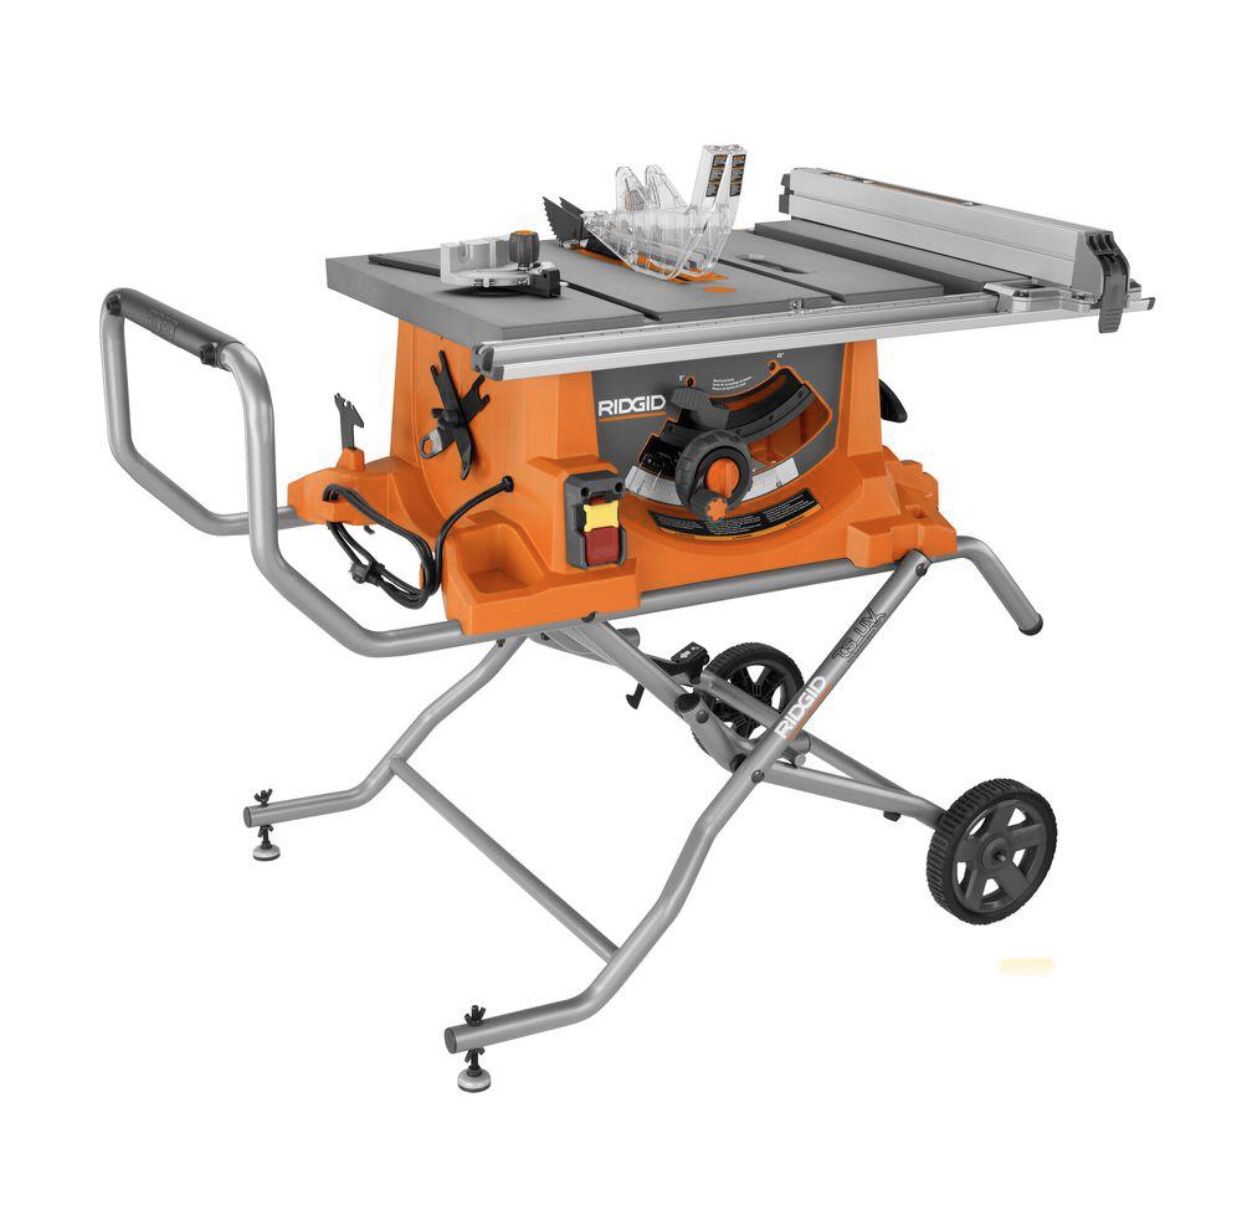 Ridgid Heavy Duty 10 in. Portable Table Saw With Stand